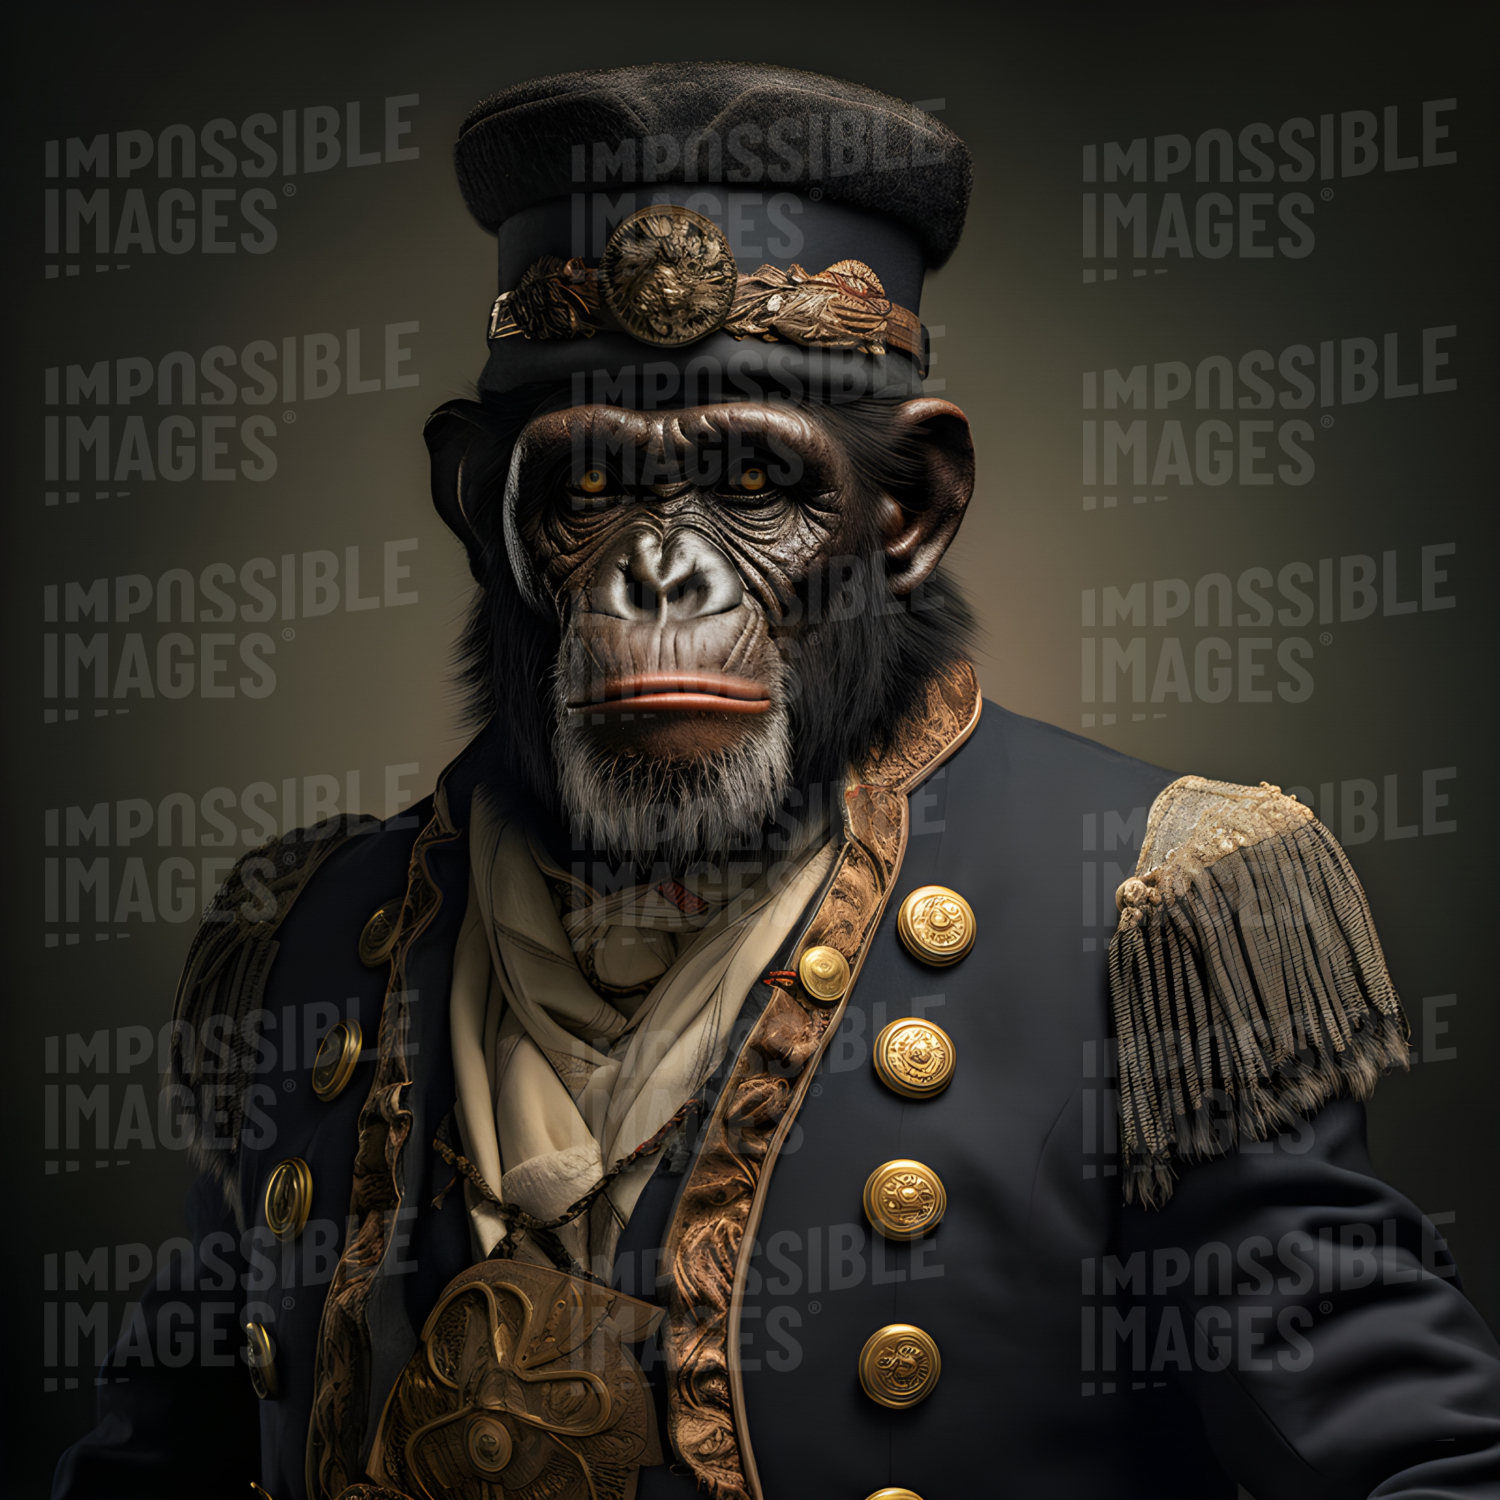 Portrait of a chimpanee in Victorian-style military uniform